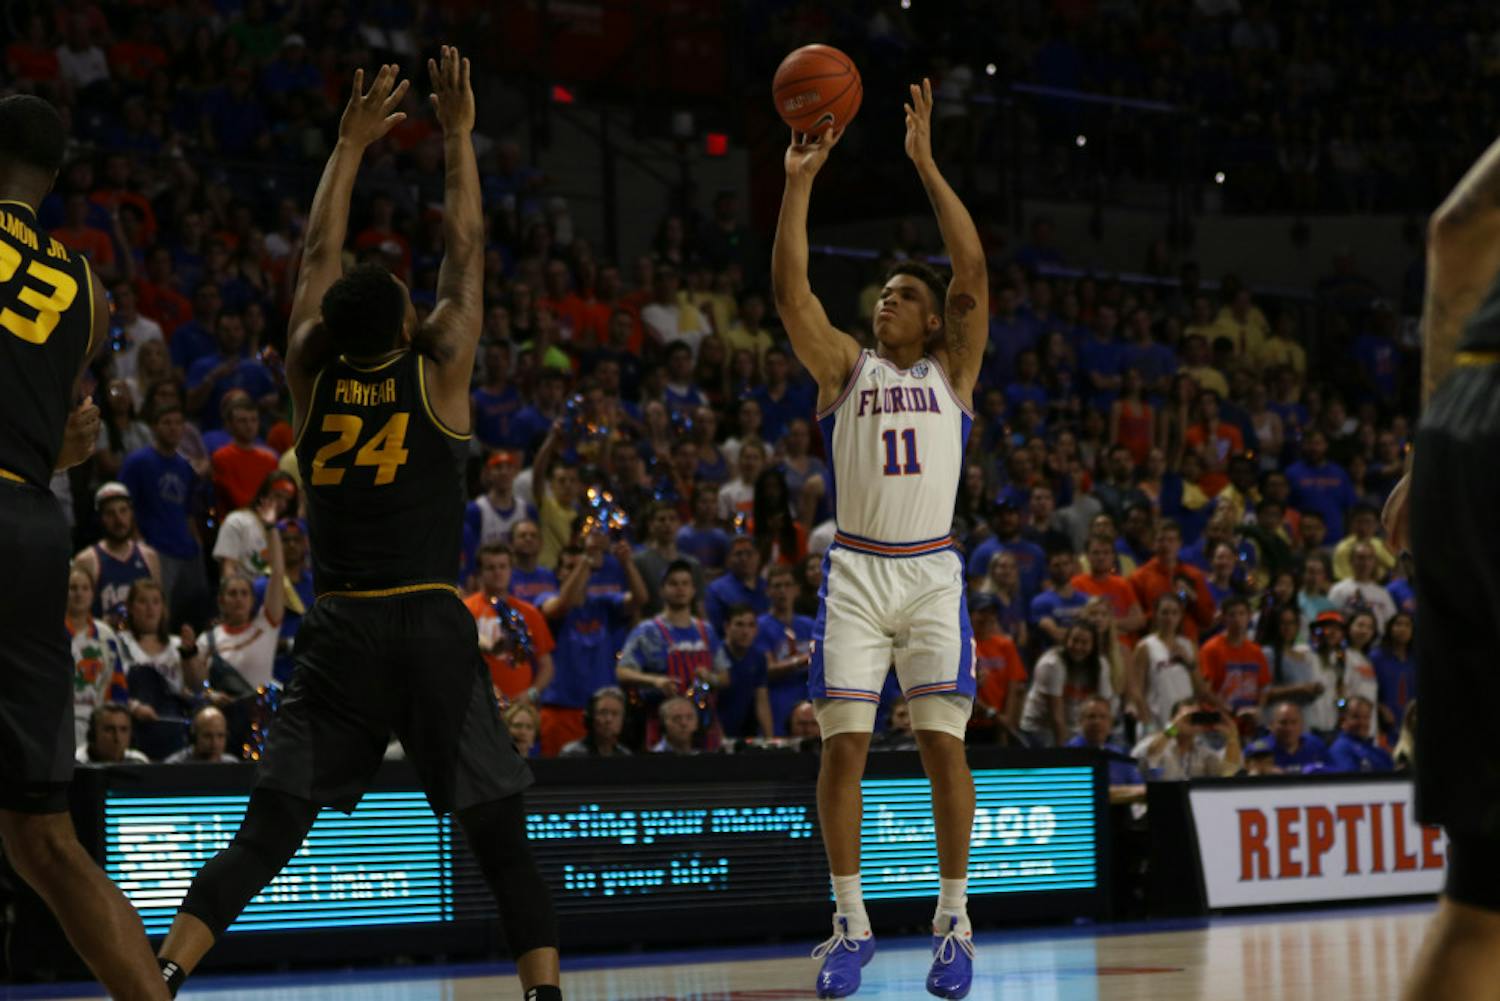 Florida forward Keyontae Johnson scored 13 points on 4-of-8 shooting in UF's 64-60 win over Missouri on Saturday at the O'Connell Center. 